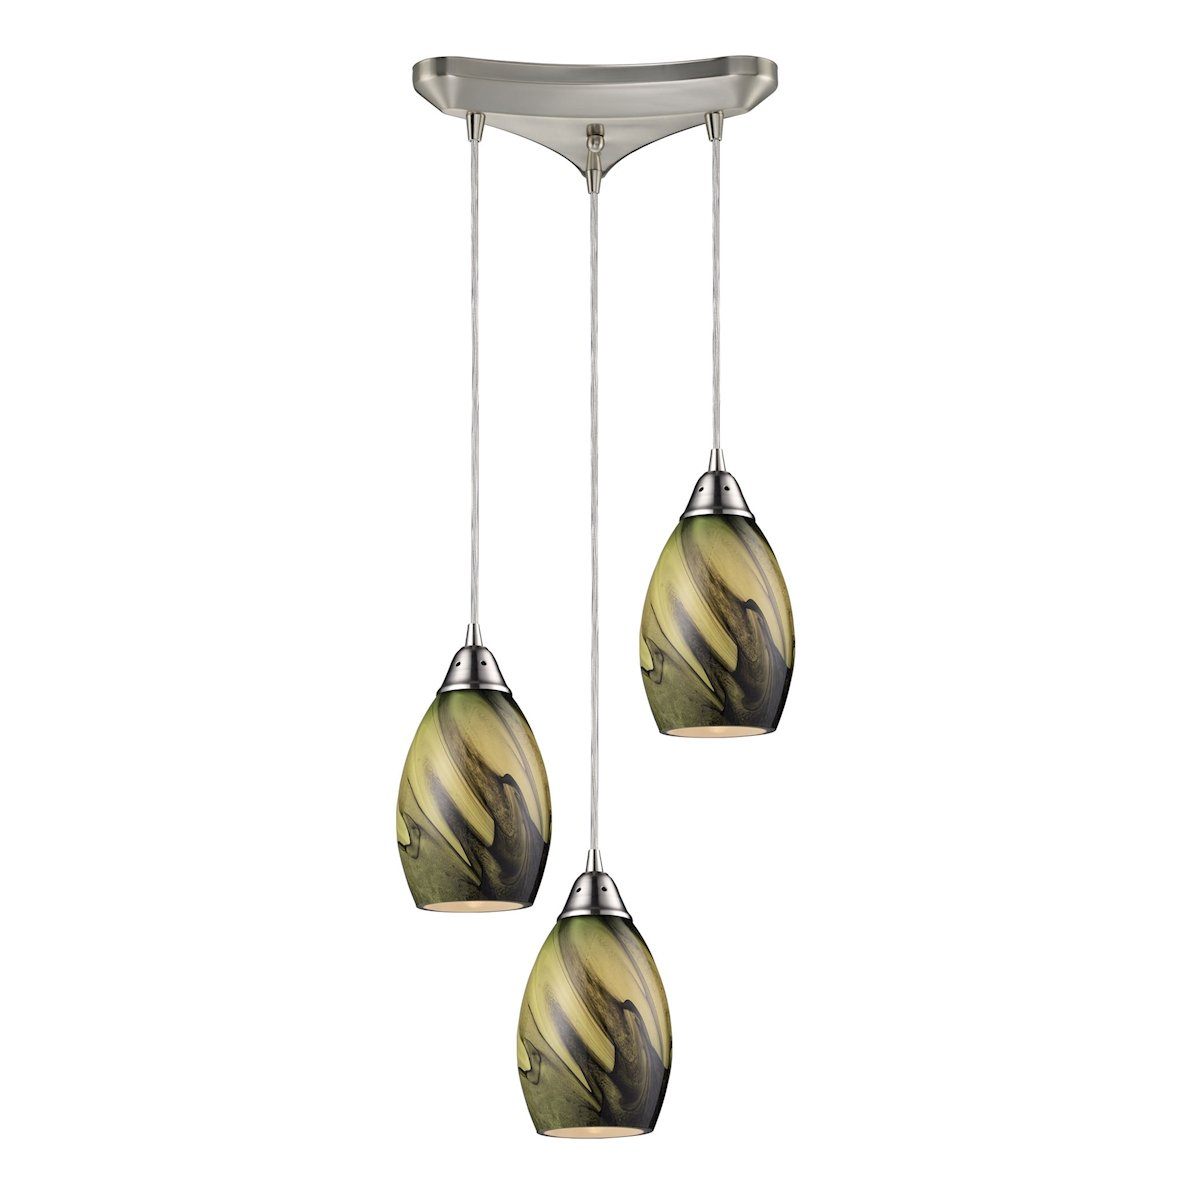 Formations 3 Light Pendant In Satin Nickel And Planetary Glass Ceiling Elk Lighting 